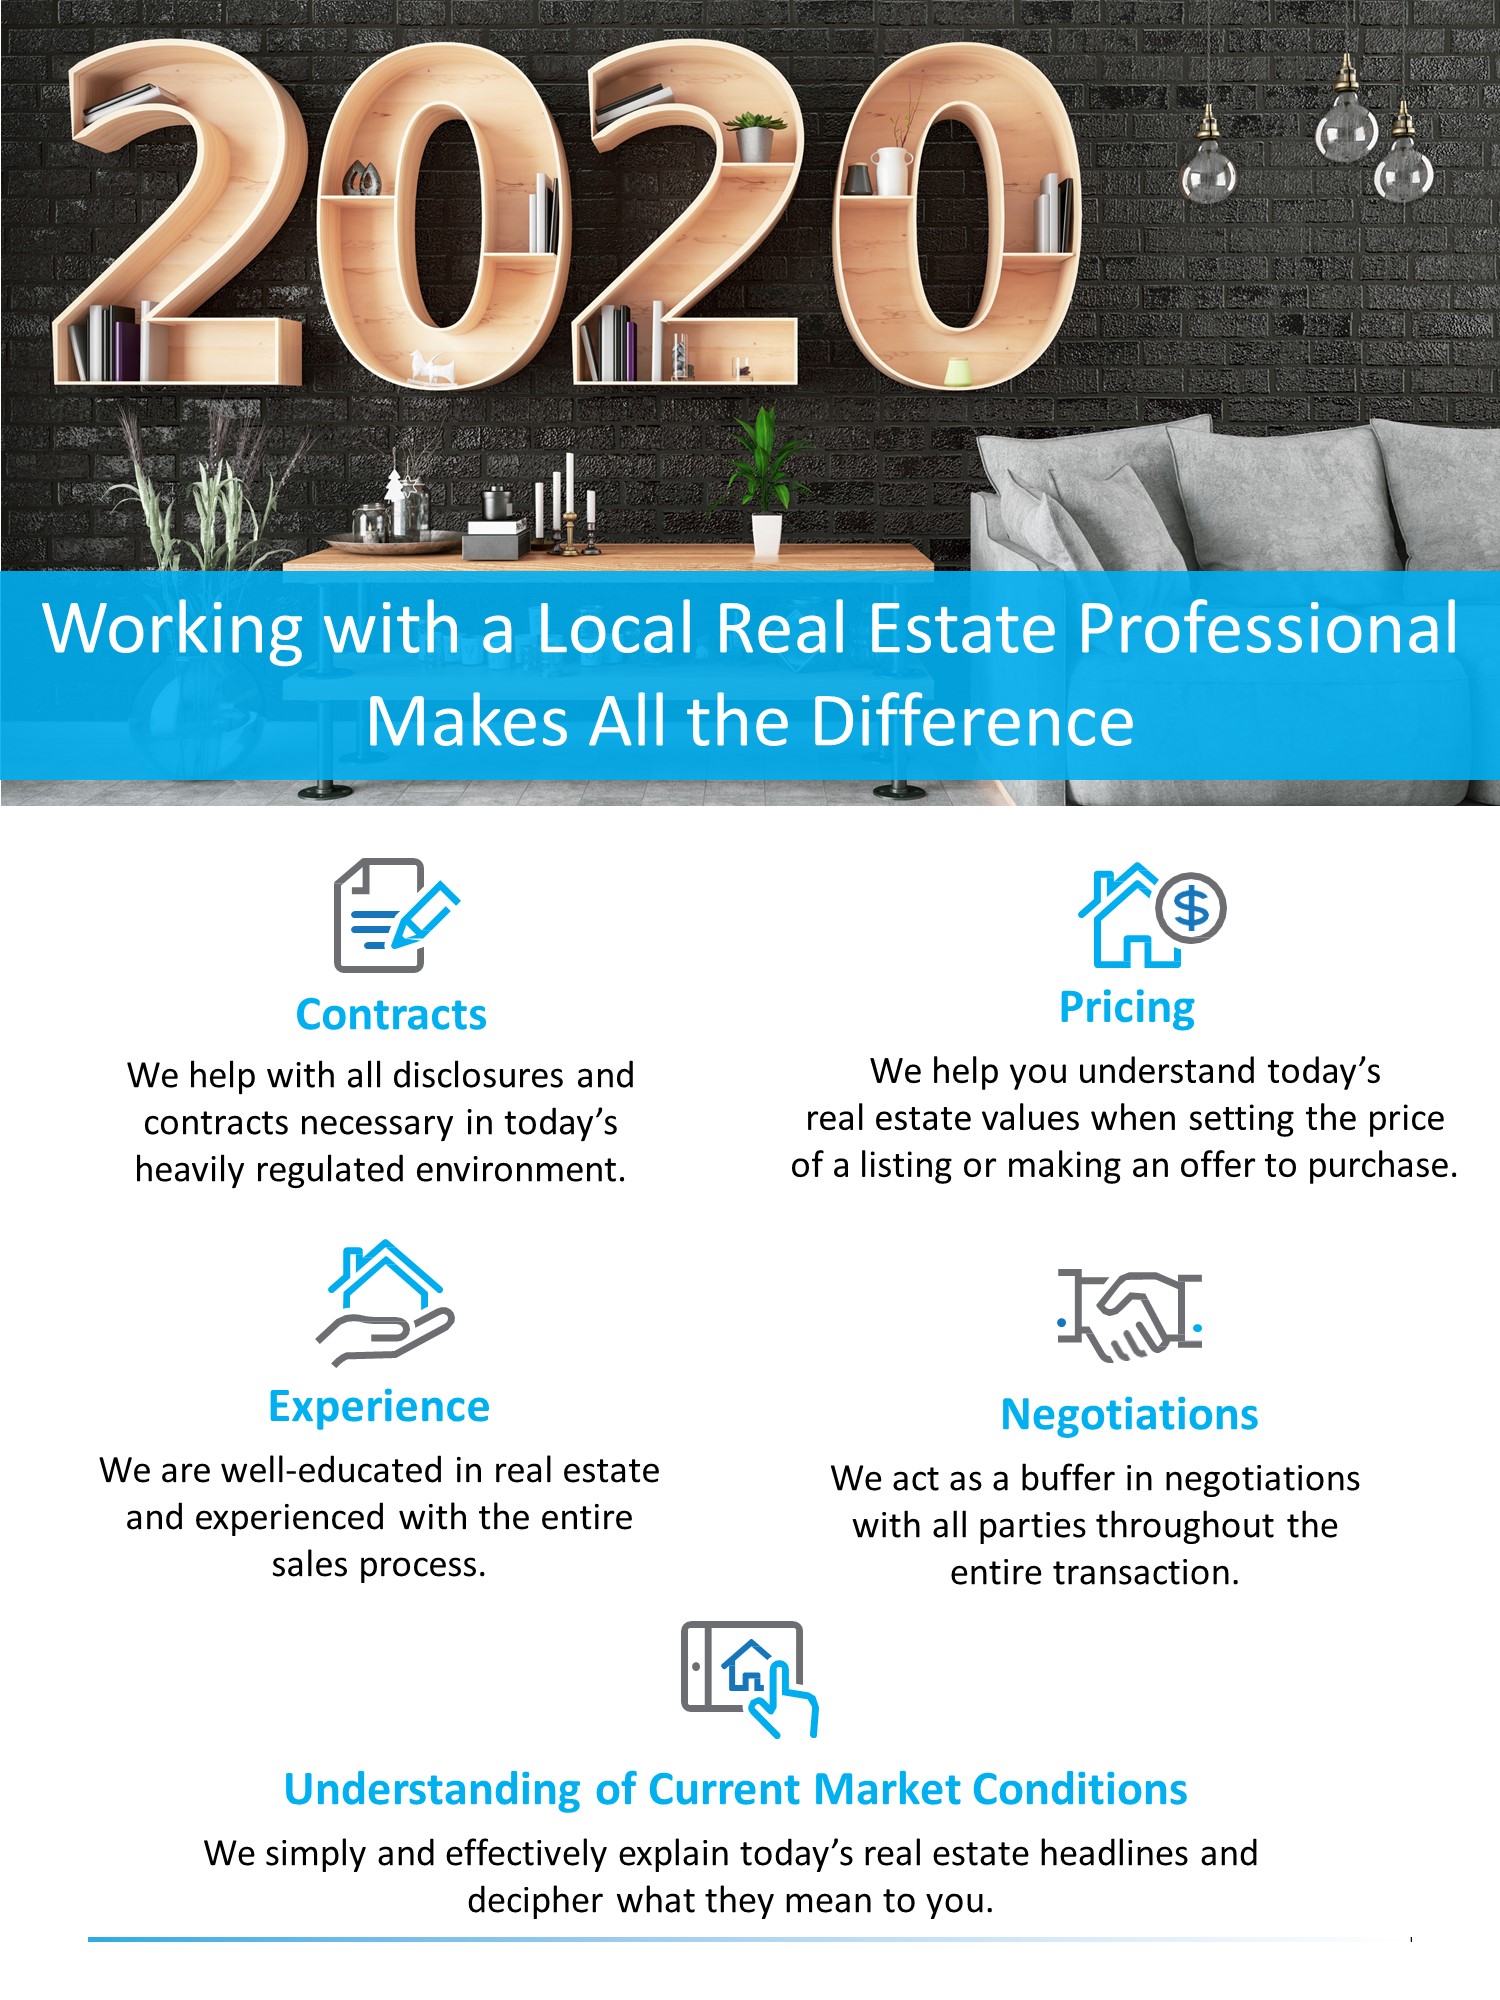 Working with a Local Real Estate Professional Makes All the Difference [INFOGRAPHIC] | Simplifying The Market